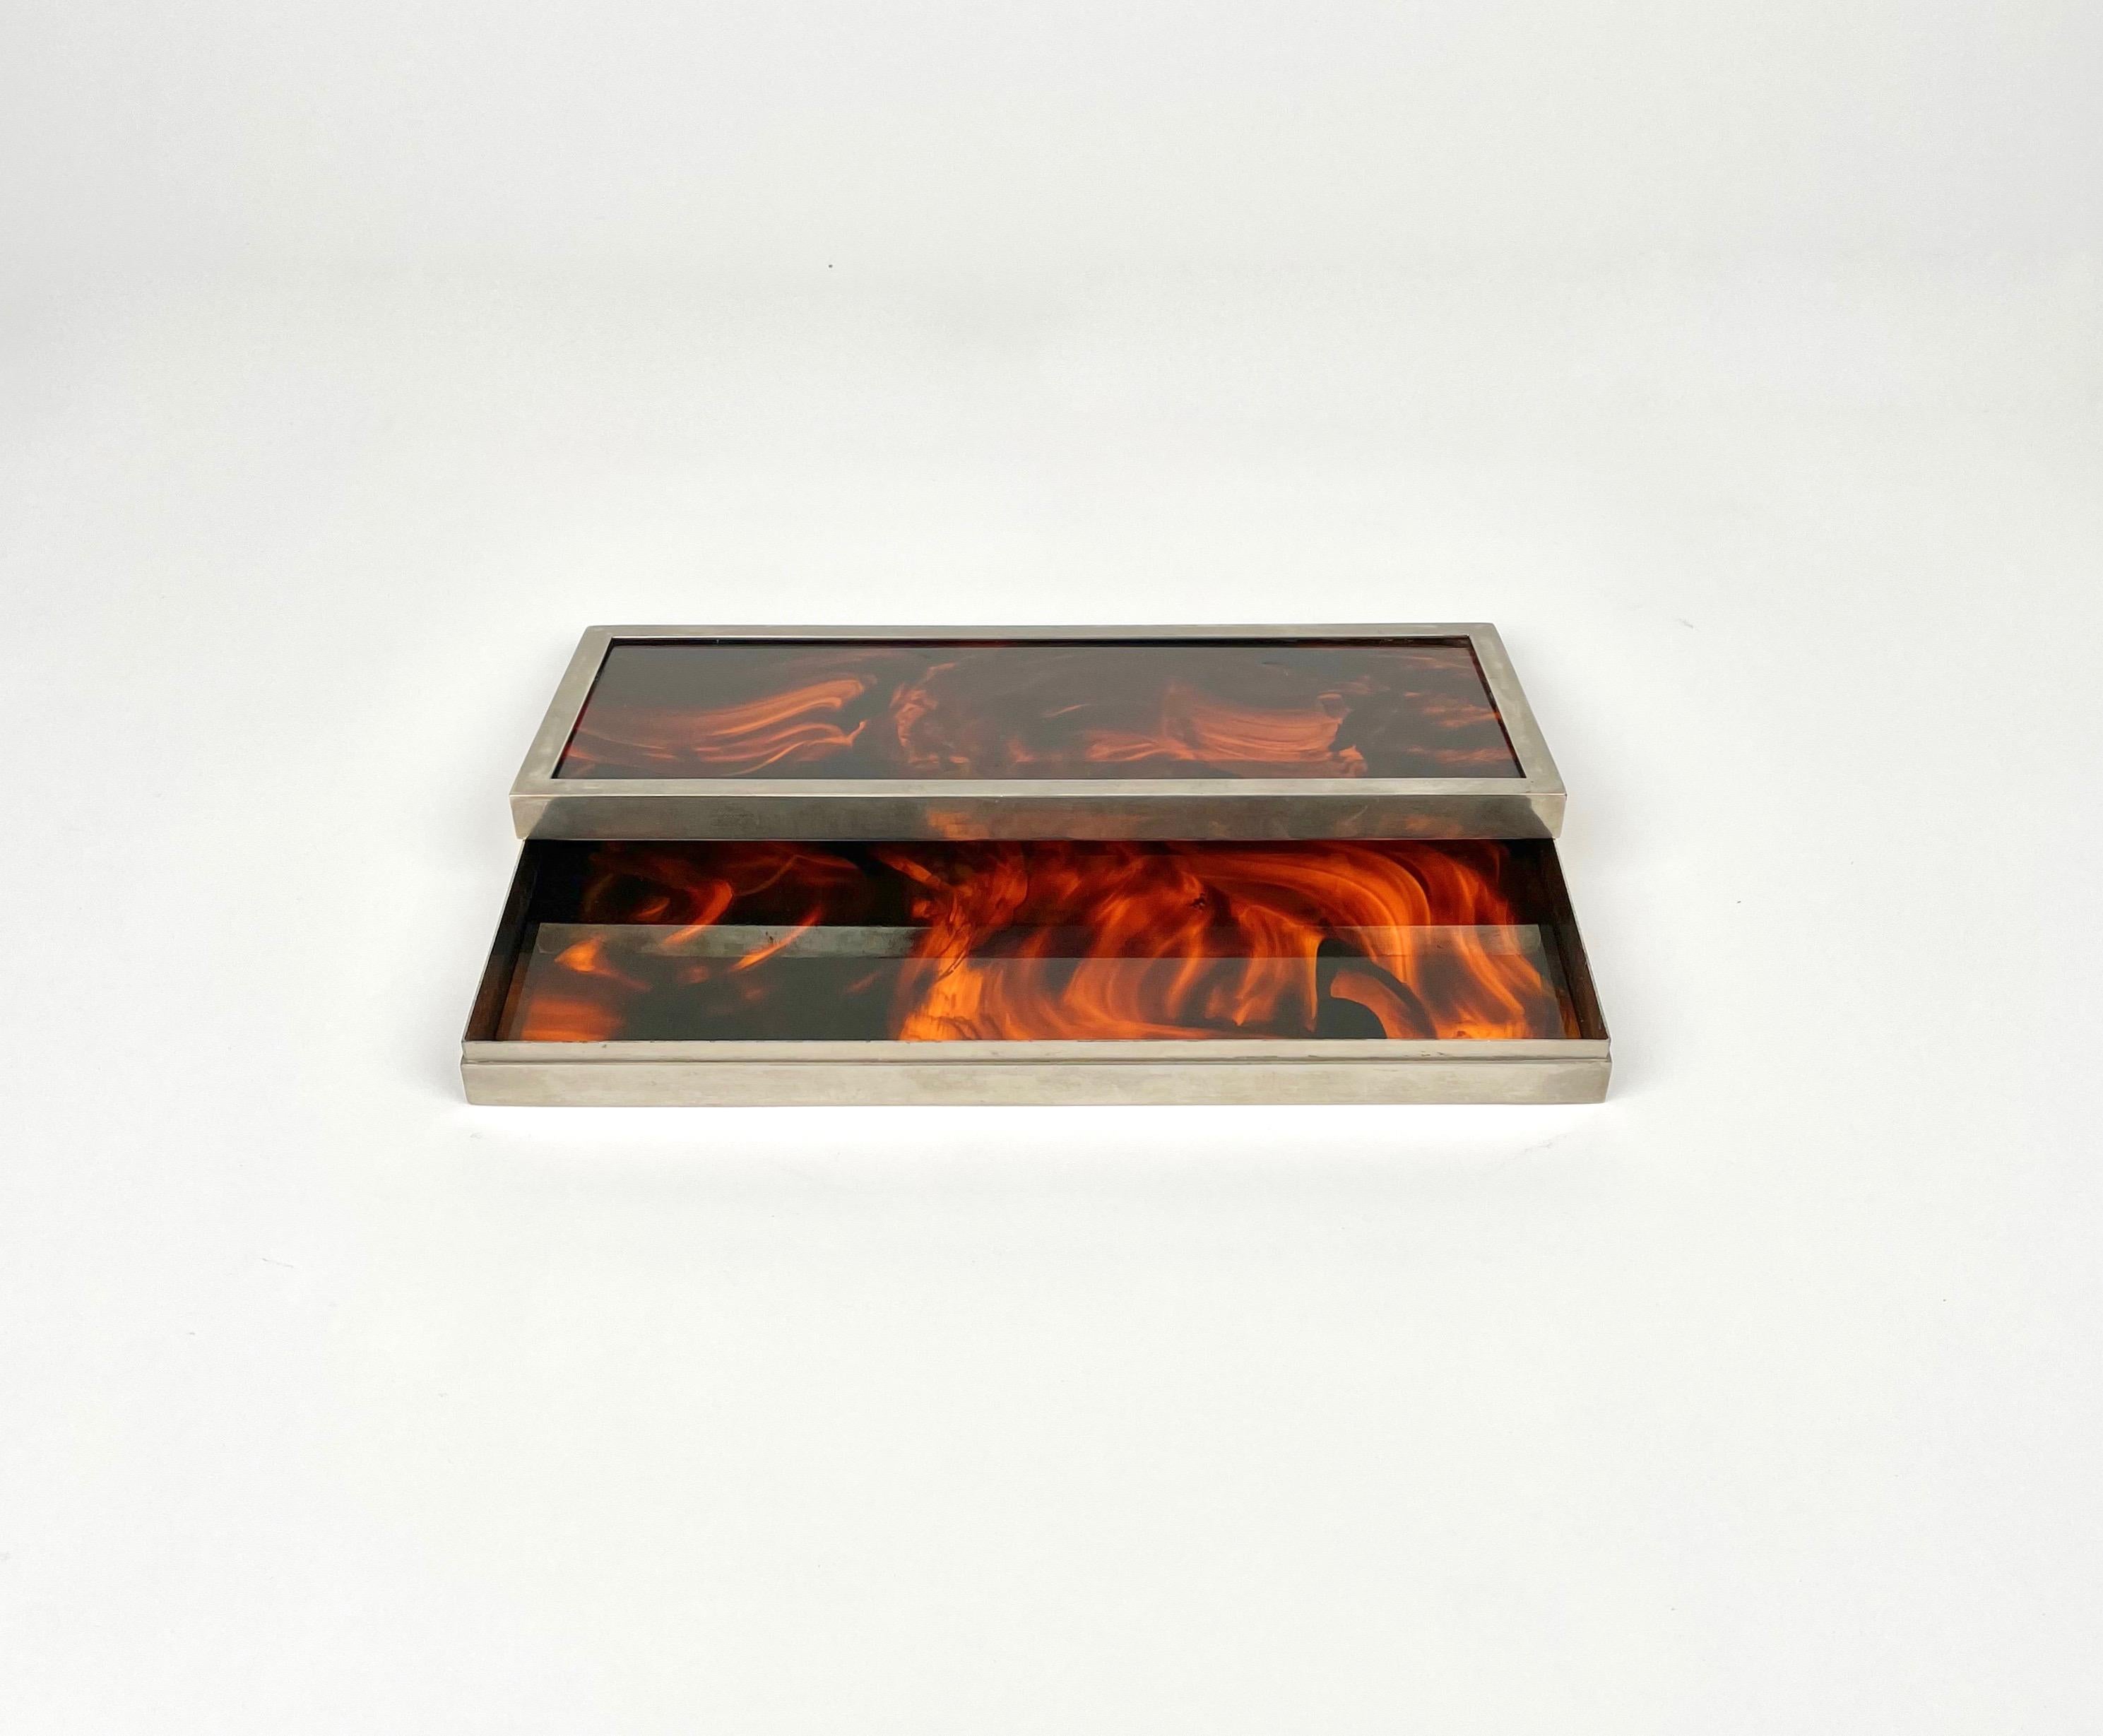 Metal Box Tortoiseshell Effect Lucite and Chrome Christian Dior style, Italy 1970s